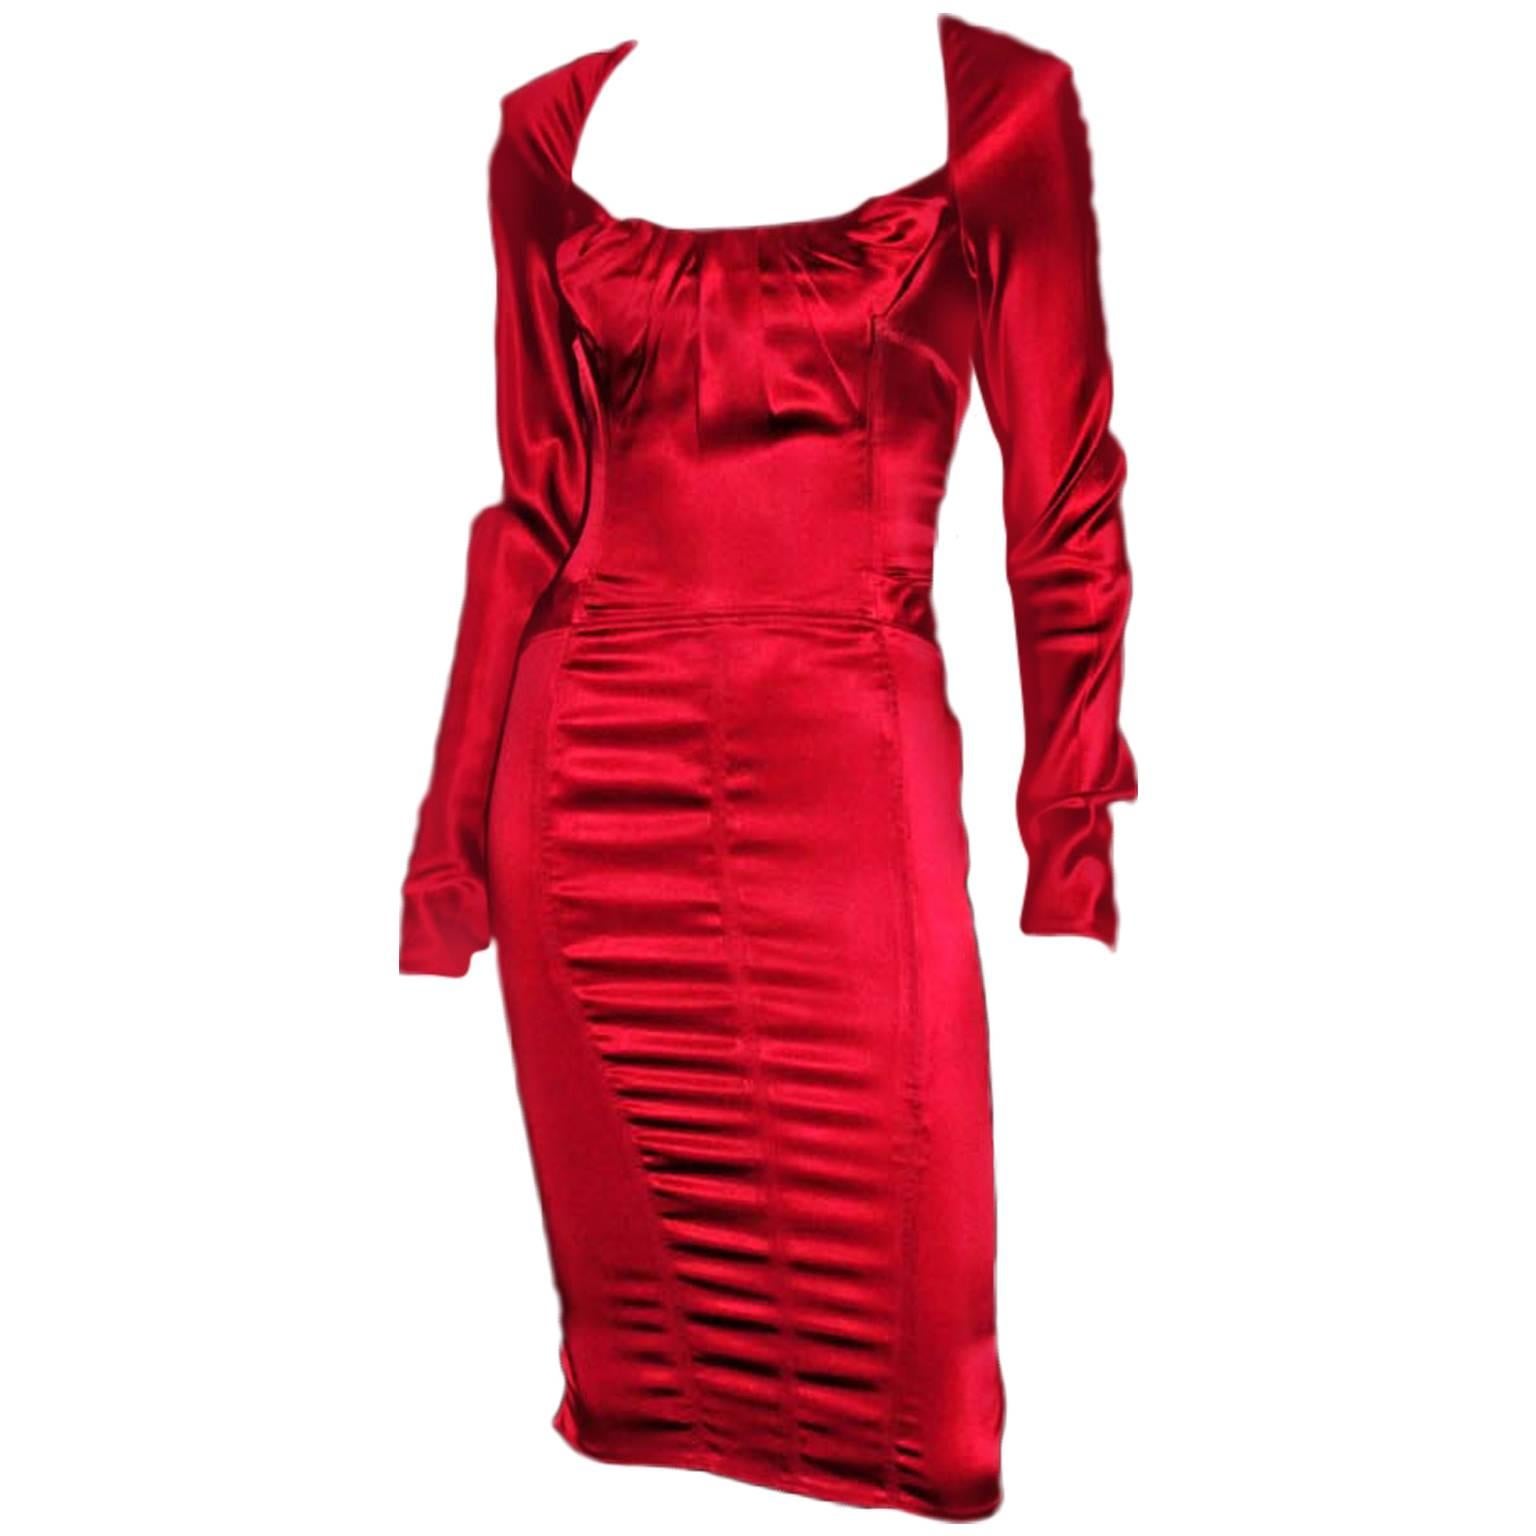 Uber Rare & Iconic Tom Ford Gucci FW 2003 Cherry Red Silk Corseted Bustle Dress!